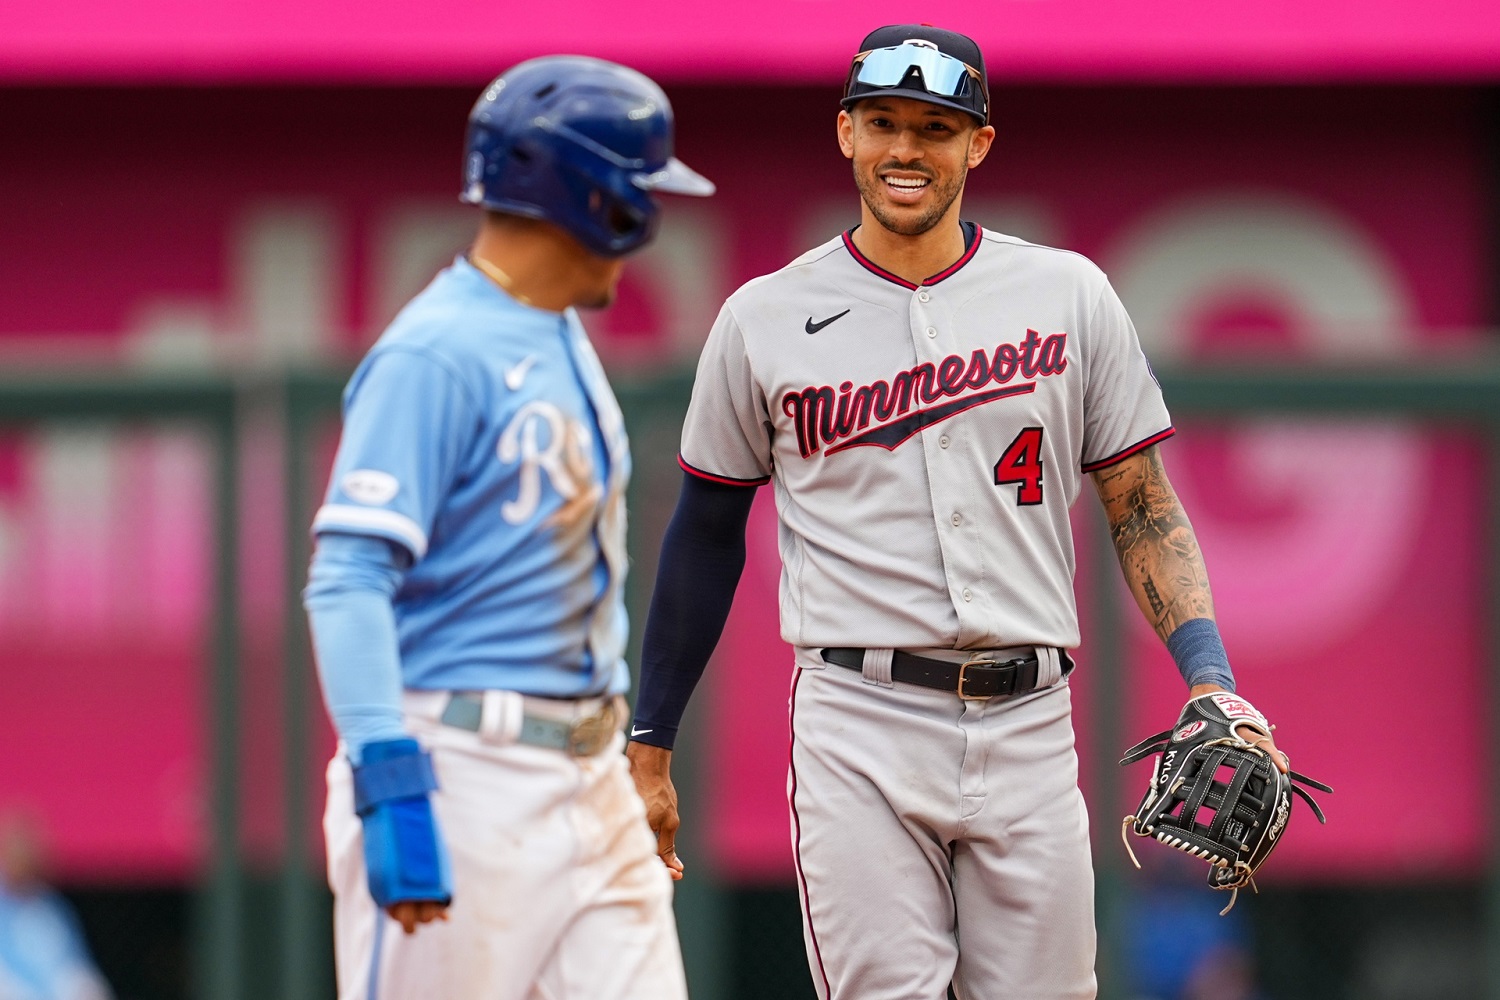 WATCH: Twins officially welcome Carlos Correa 